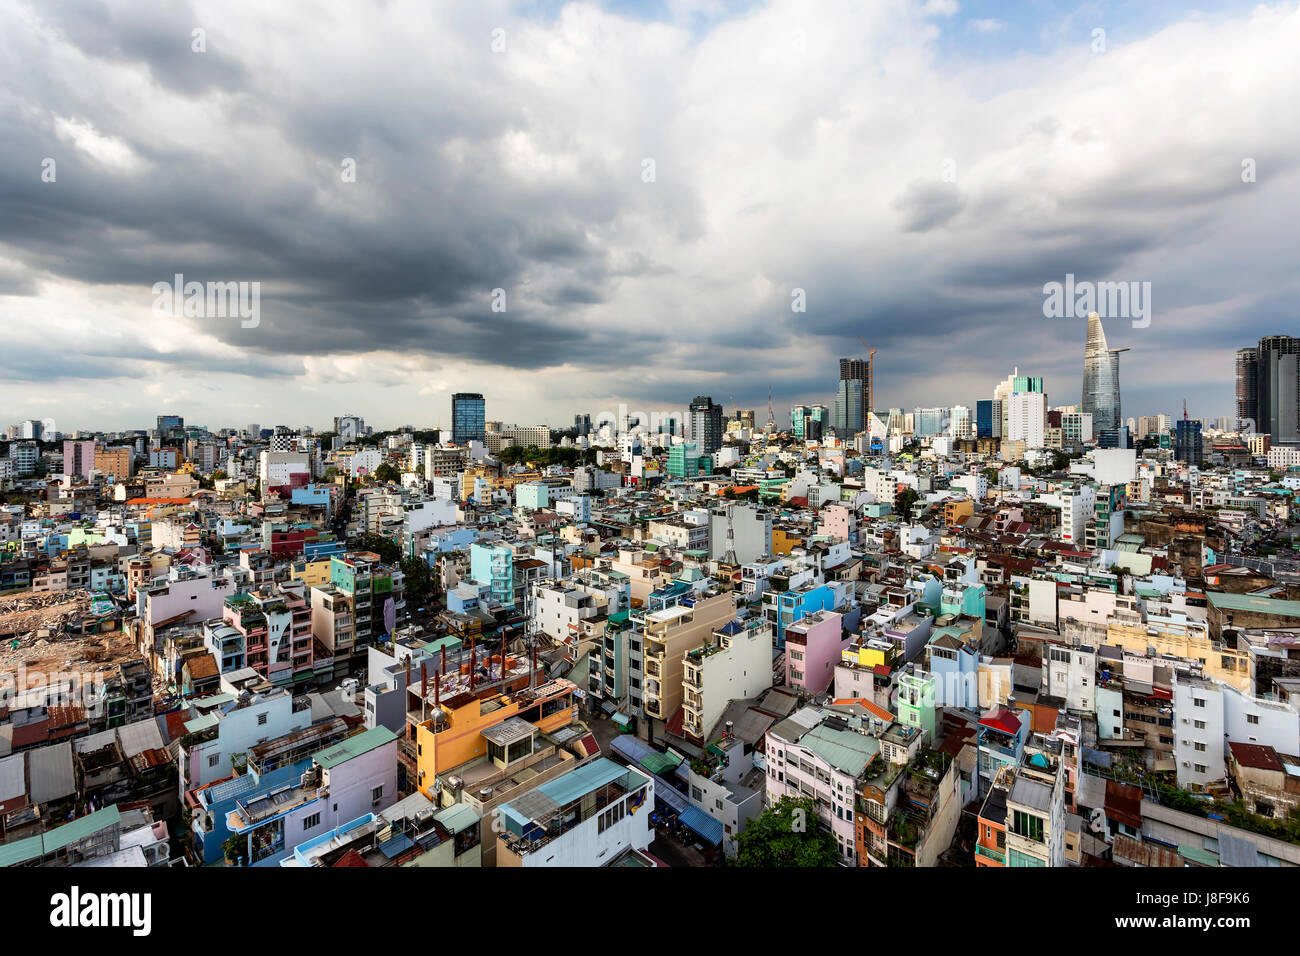 February 2017 - Ho Chi Minh City, Vietnam. Aerial view of the colorful rooftops of Saigon. Stock Photo